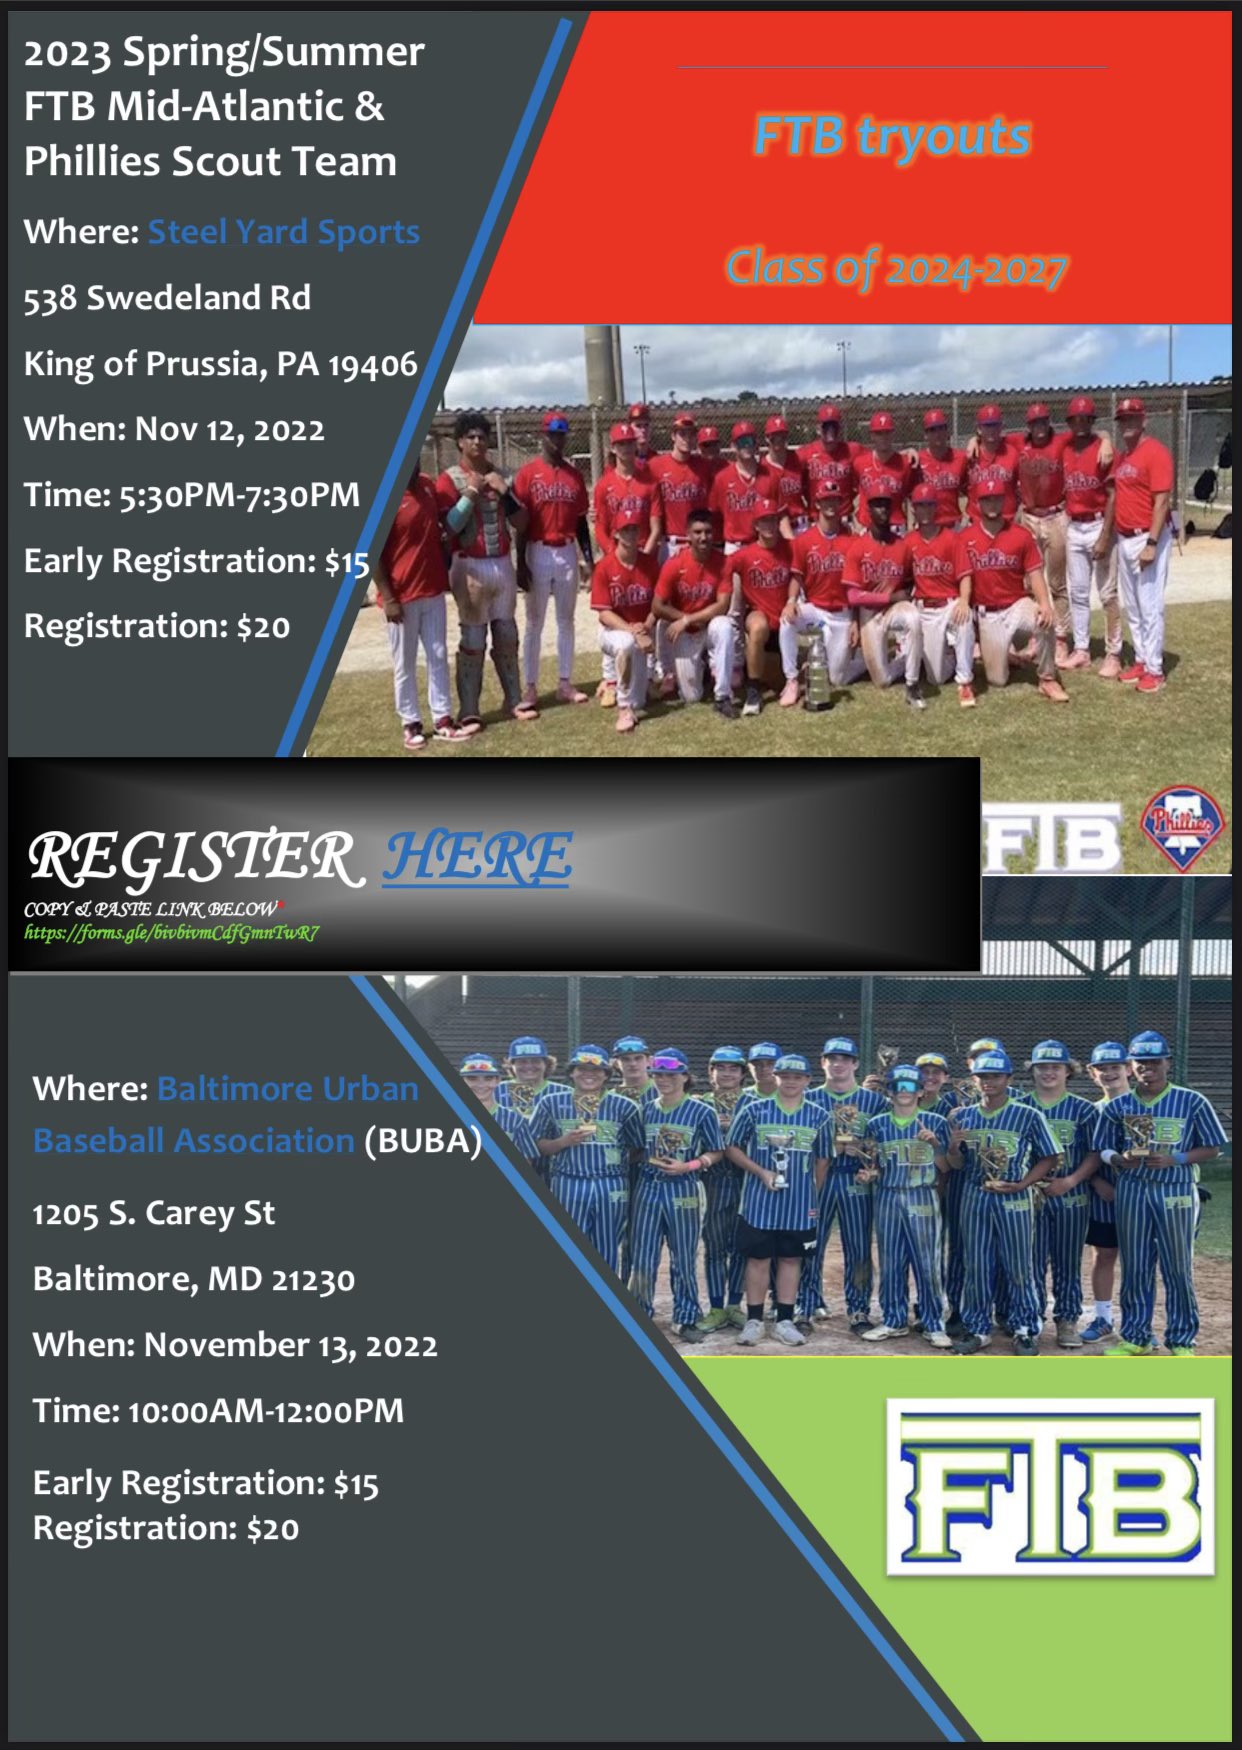 FTB Phillies Teammates  FTB Phillies 2022 Scout Team players and